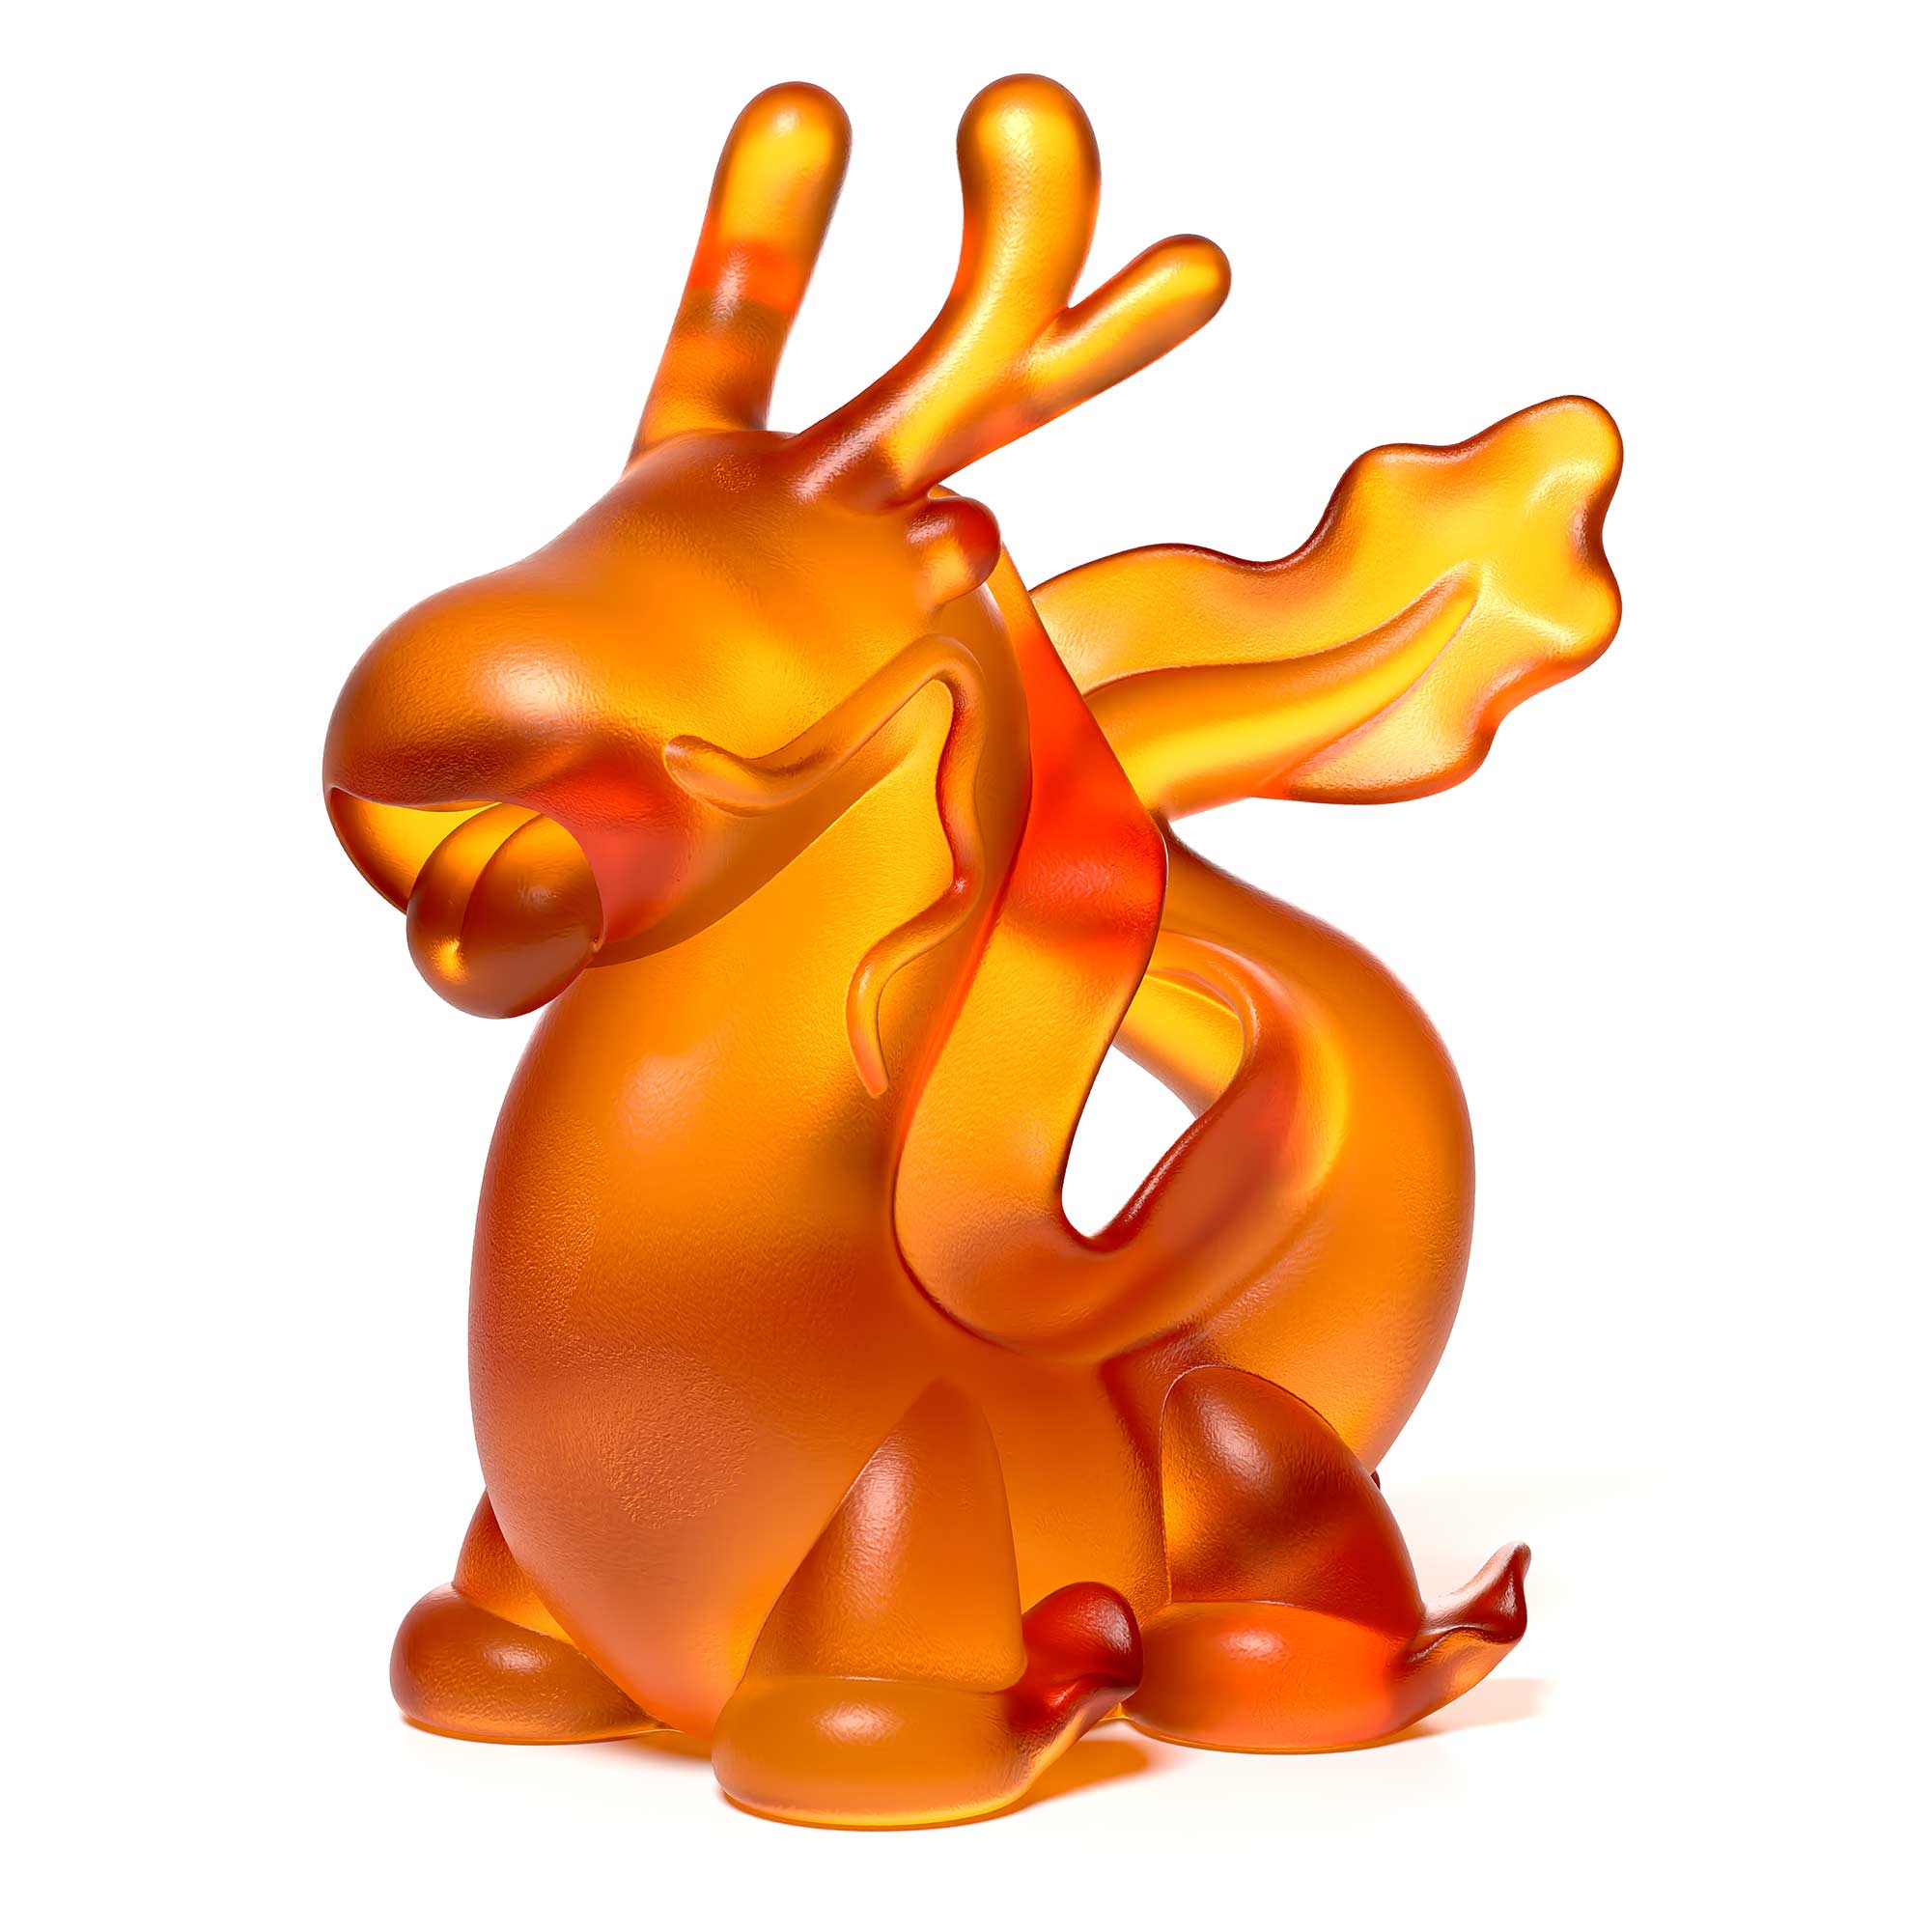 Dragon's Breath amber colour crystal sculpture the size is  16 cm height, Limited edition of 50, by Ferdi B Dick, hero view